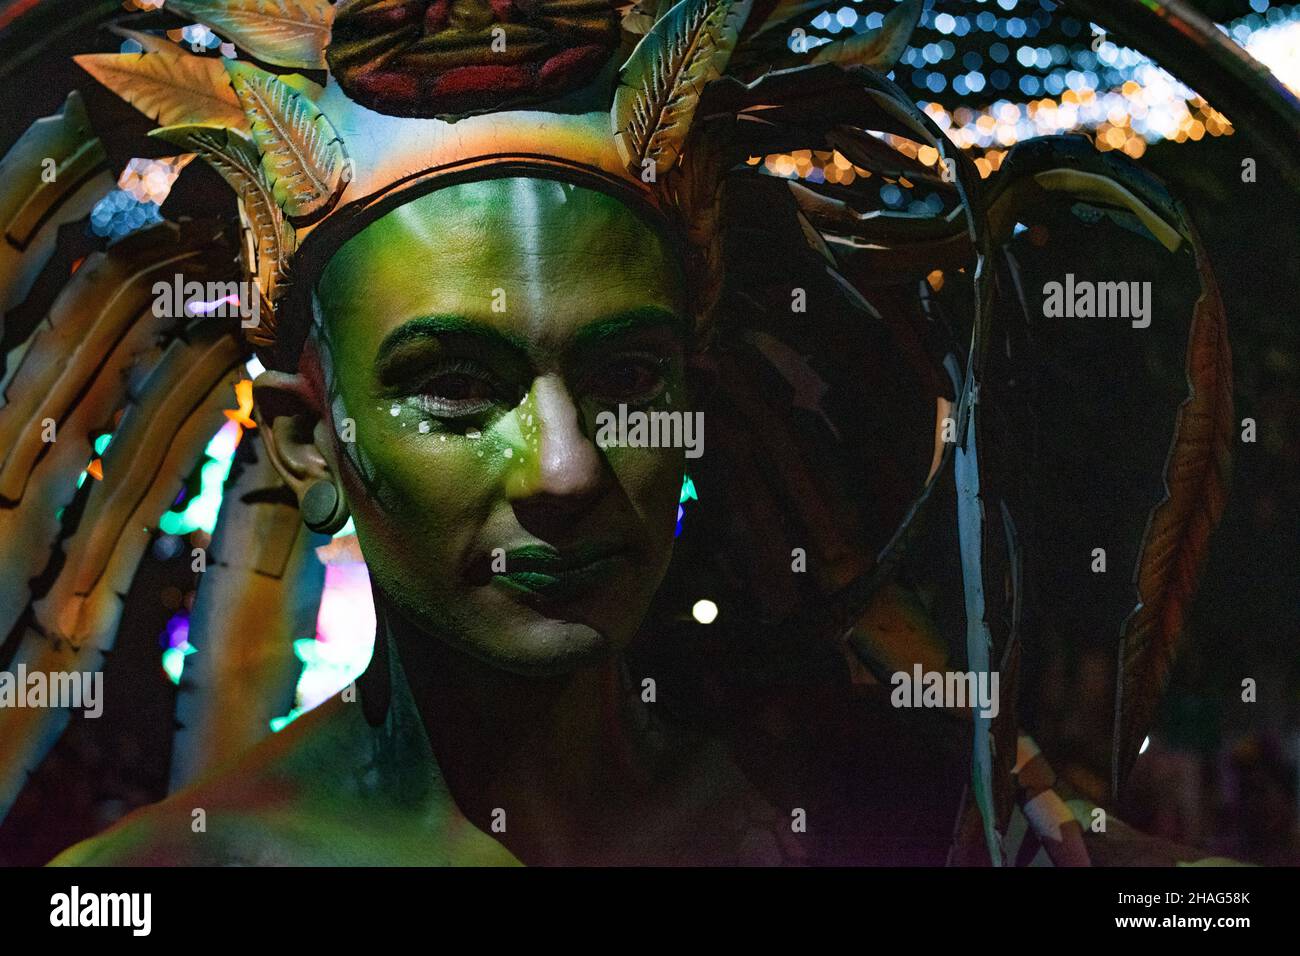 Cultural groups from across Medellin take over the streets for a festive Carnival representing Colombia's myths and legends that opens the Christmas season and Festivities in the City, in Medellin, Colombia on December 8, 2021. Stock Photo